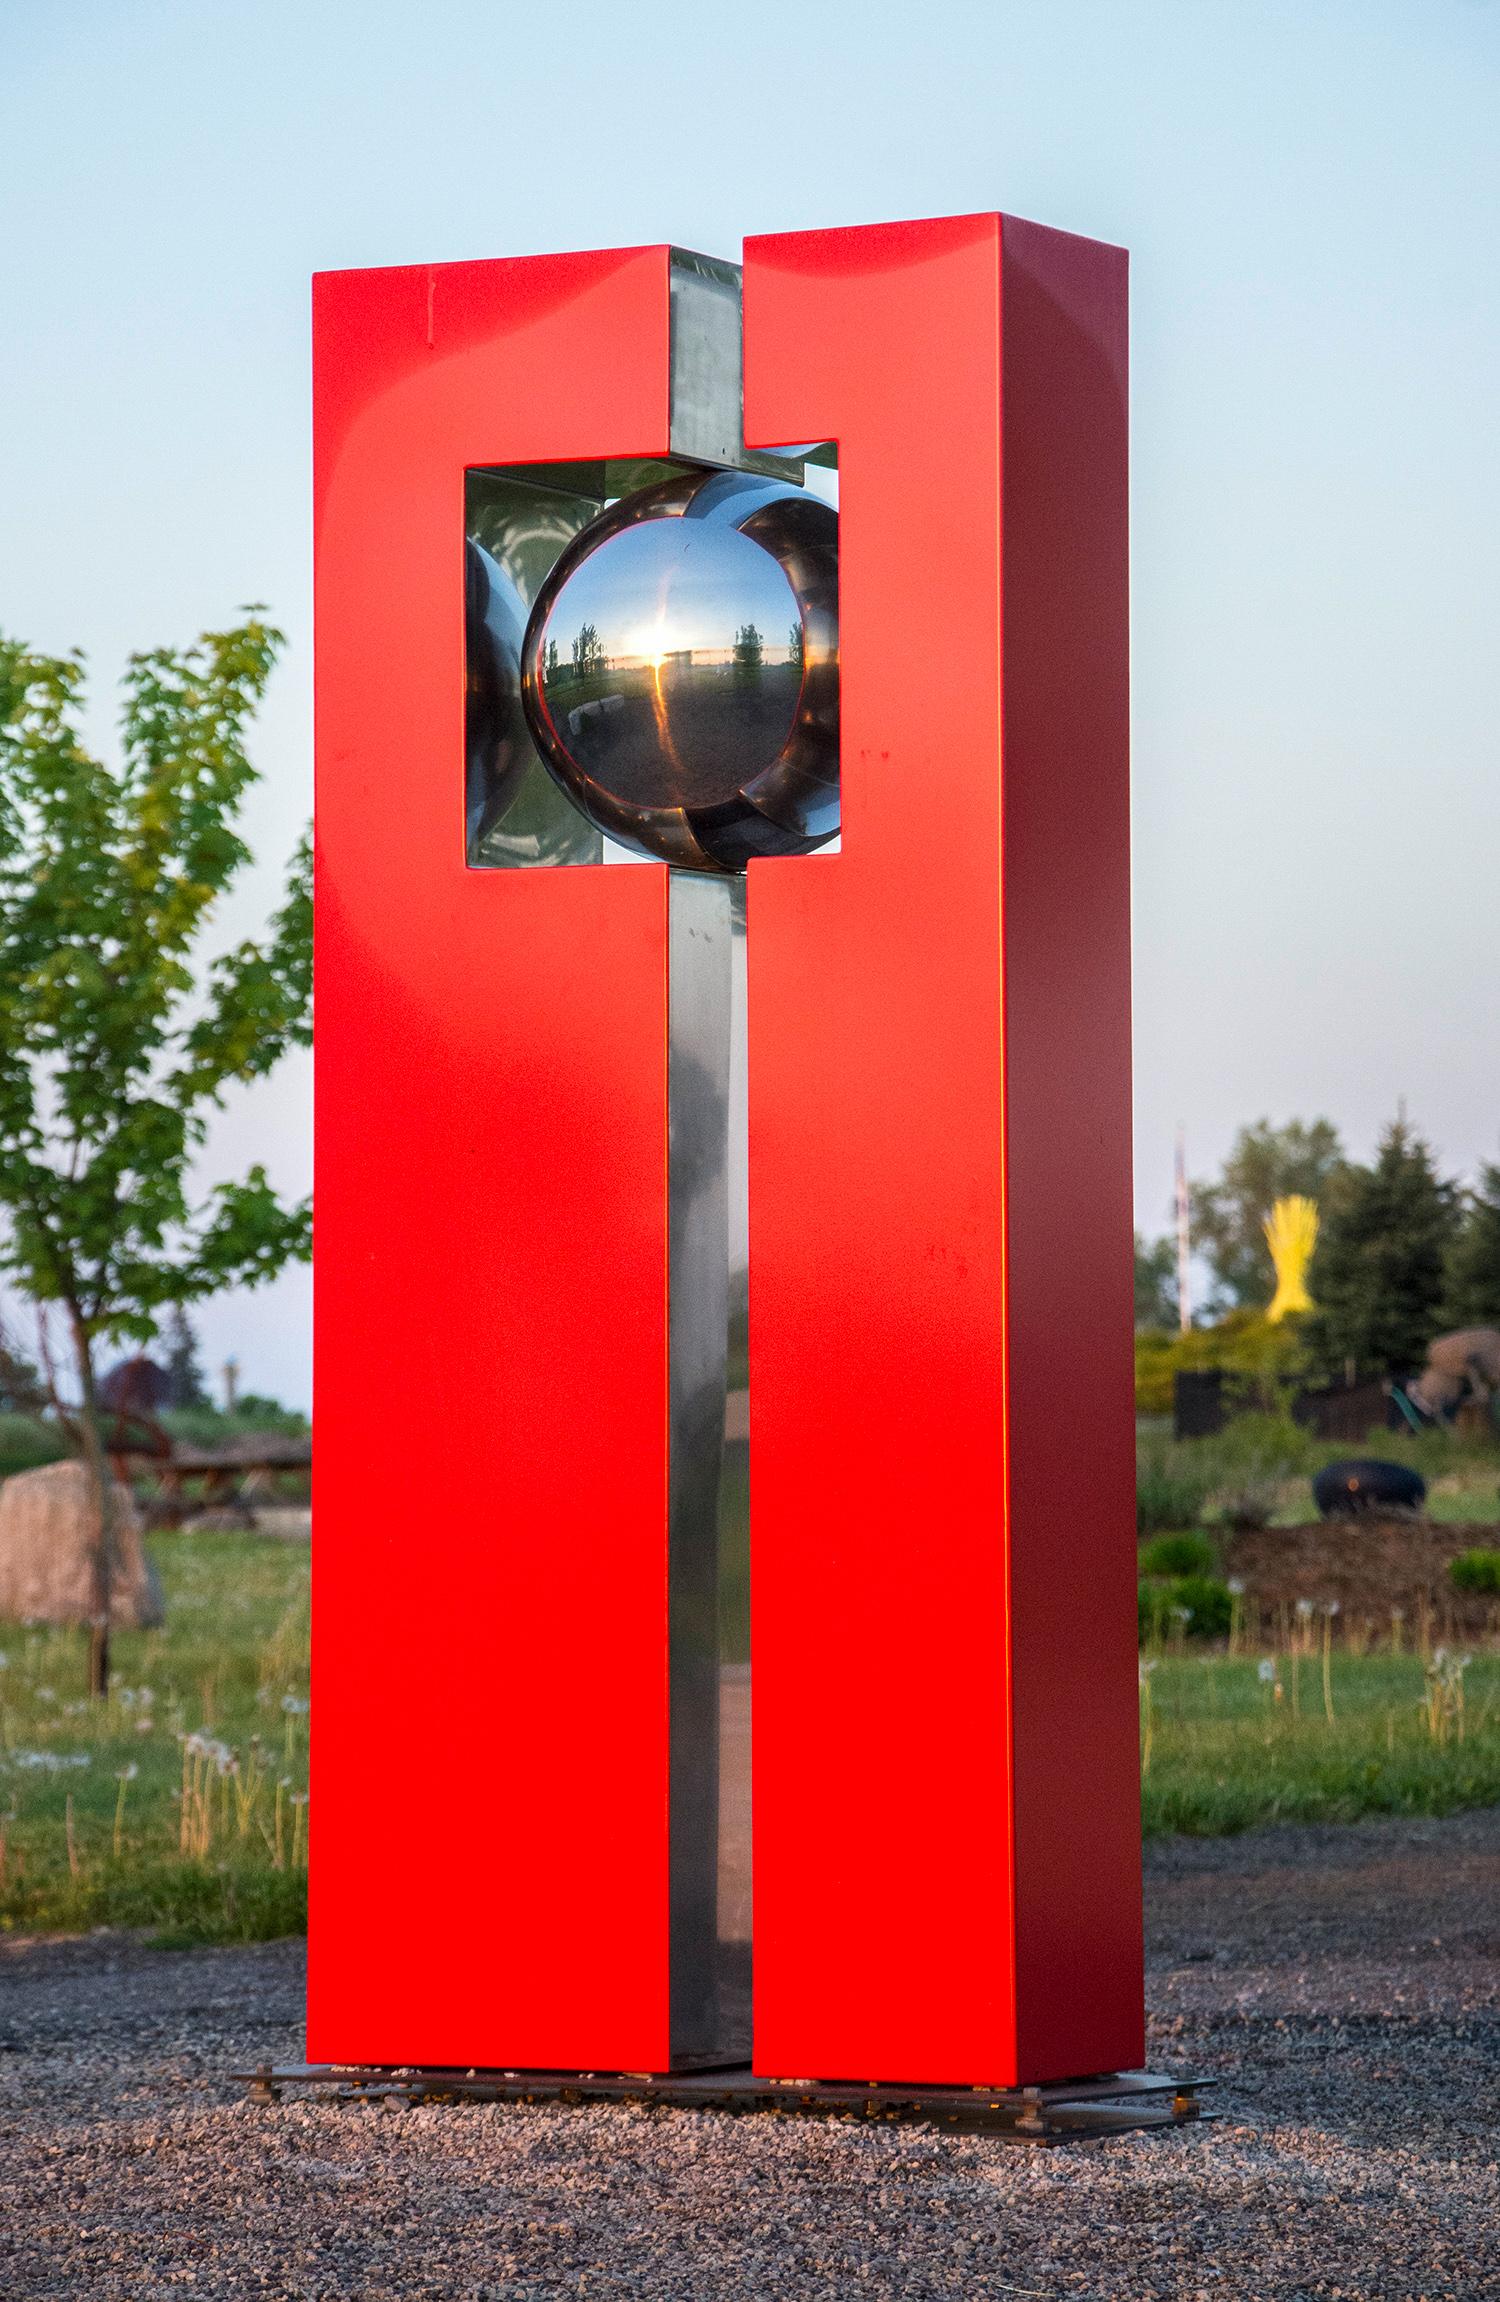 Mecanique Celeste 1/10 - tall, geometric, modern, outdoor steel sculpture - Contemporary Sculpture by Philippe Pallafray